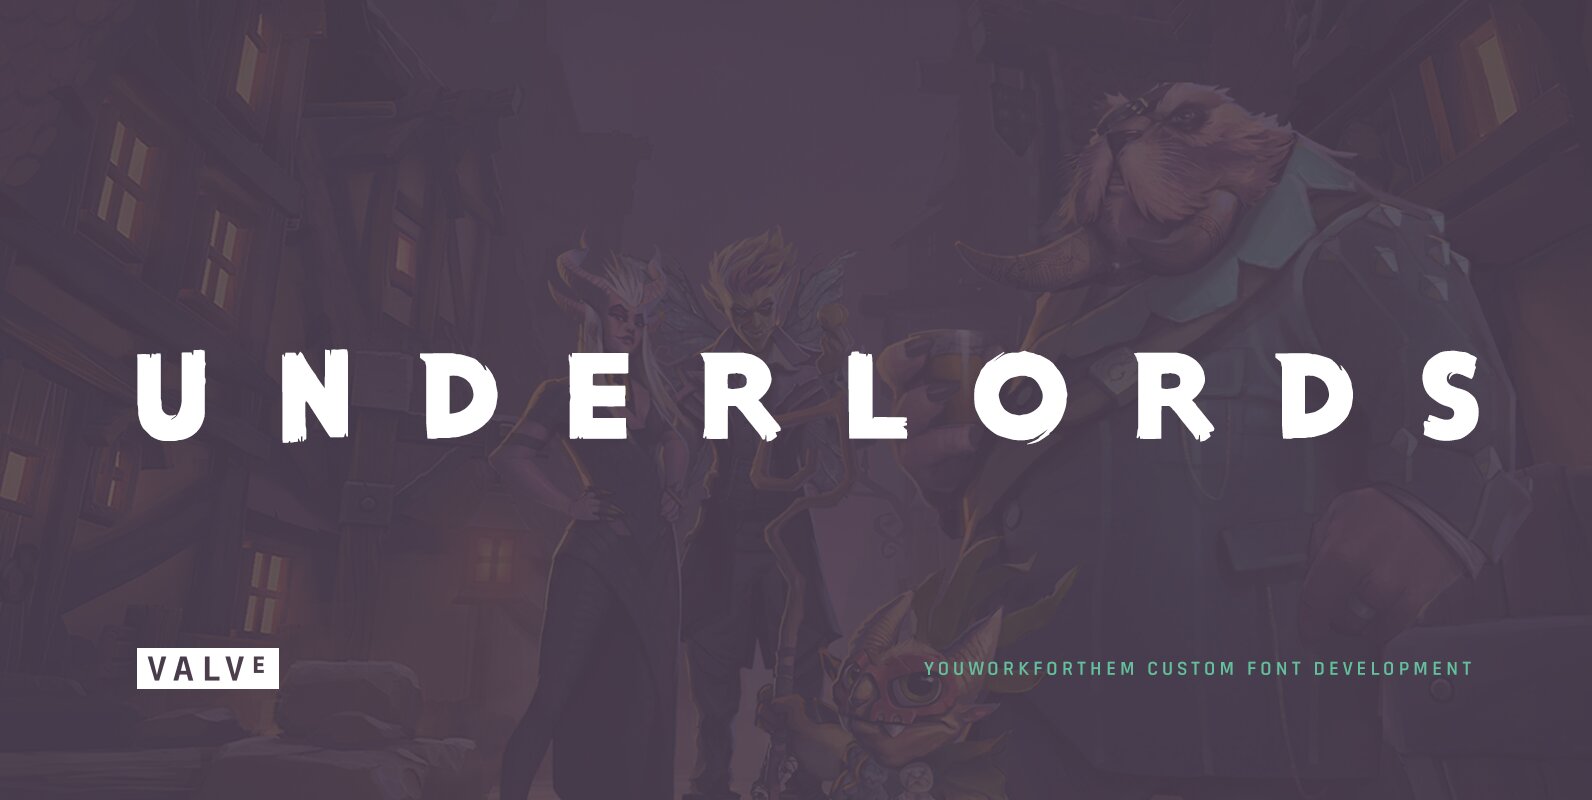 YouWorkForThem Designs Two Dota Underlords Fonts